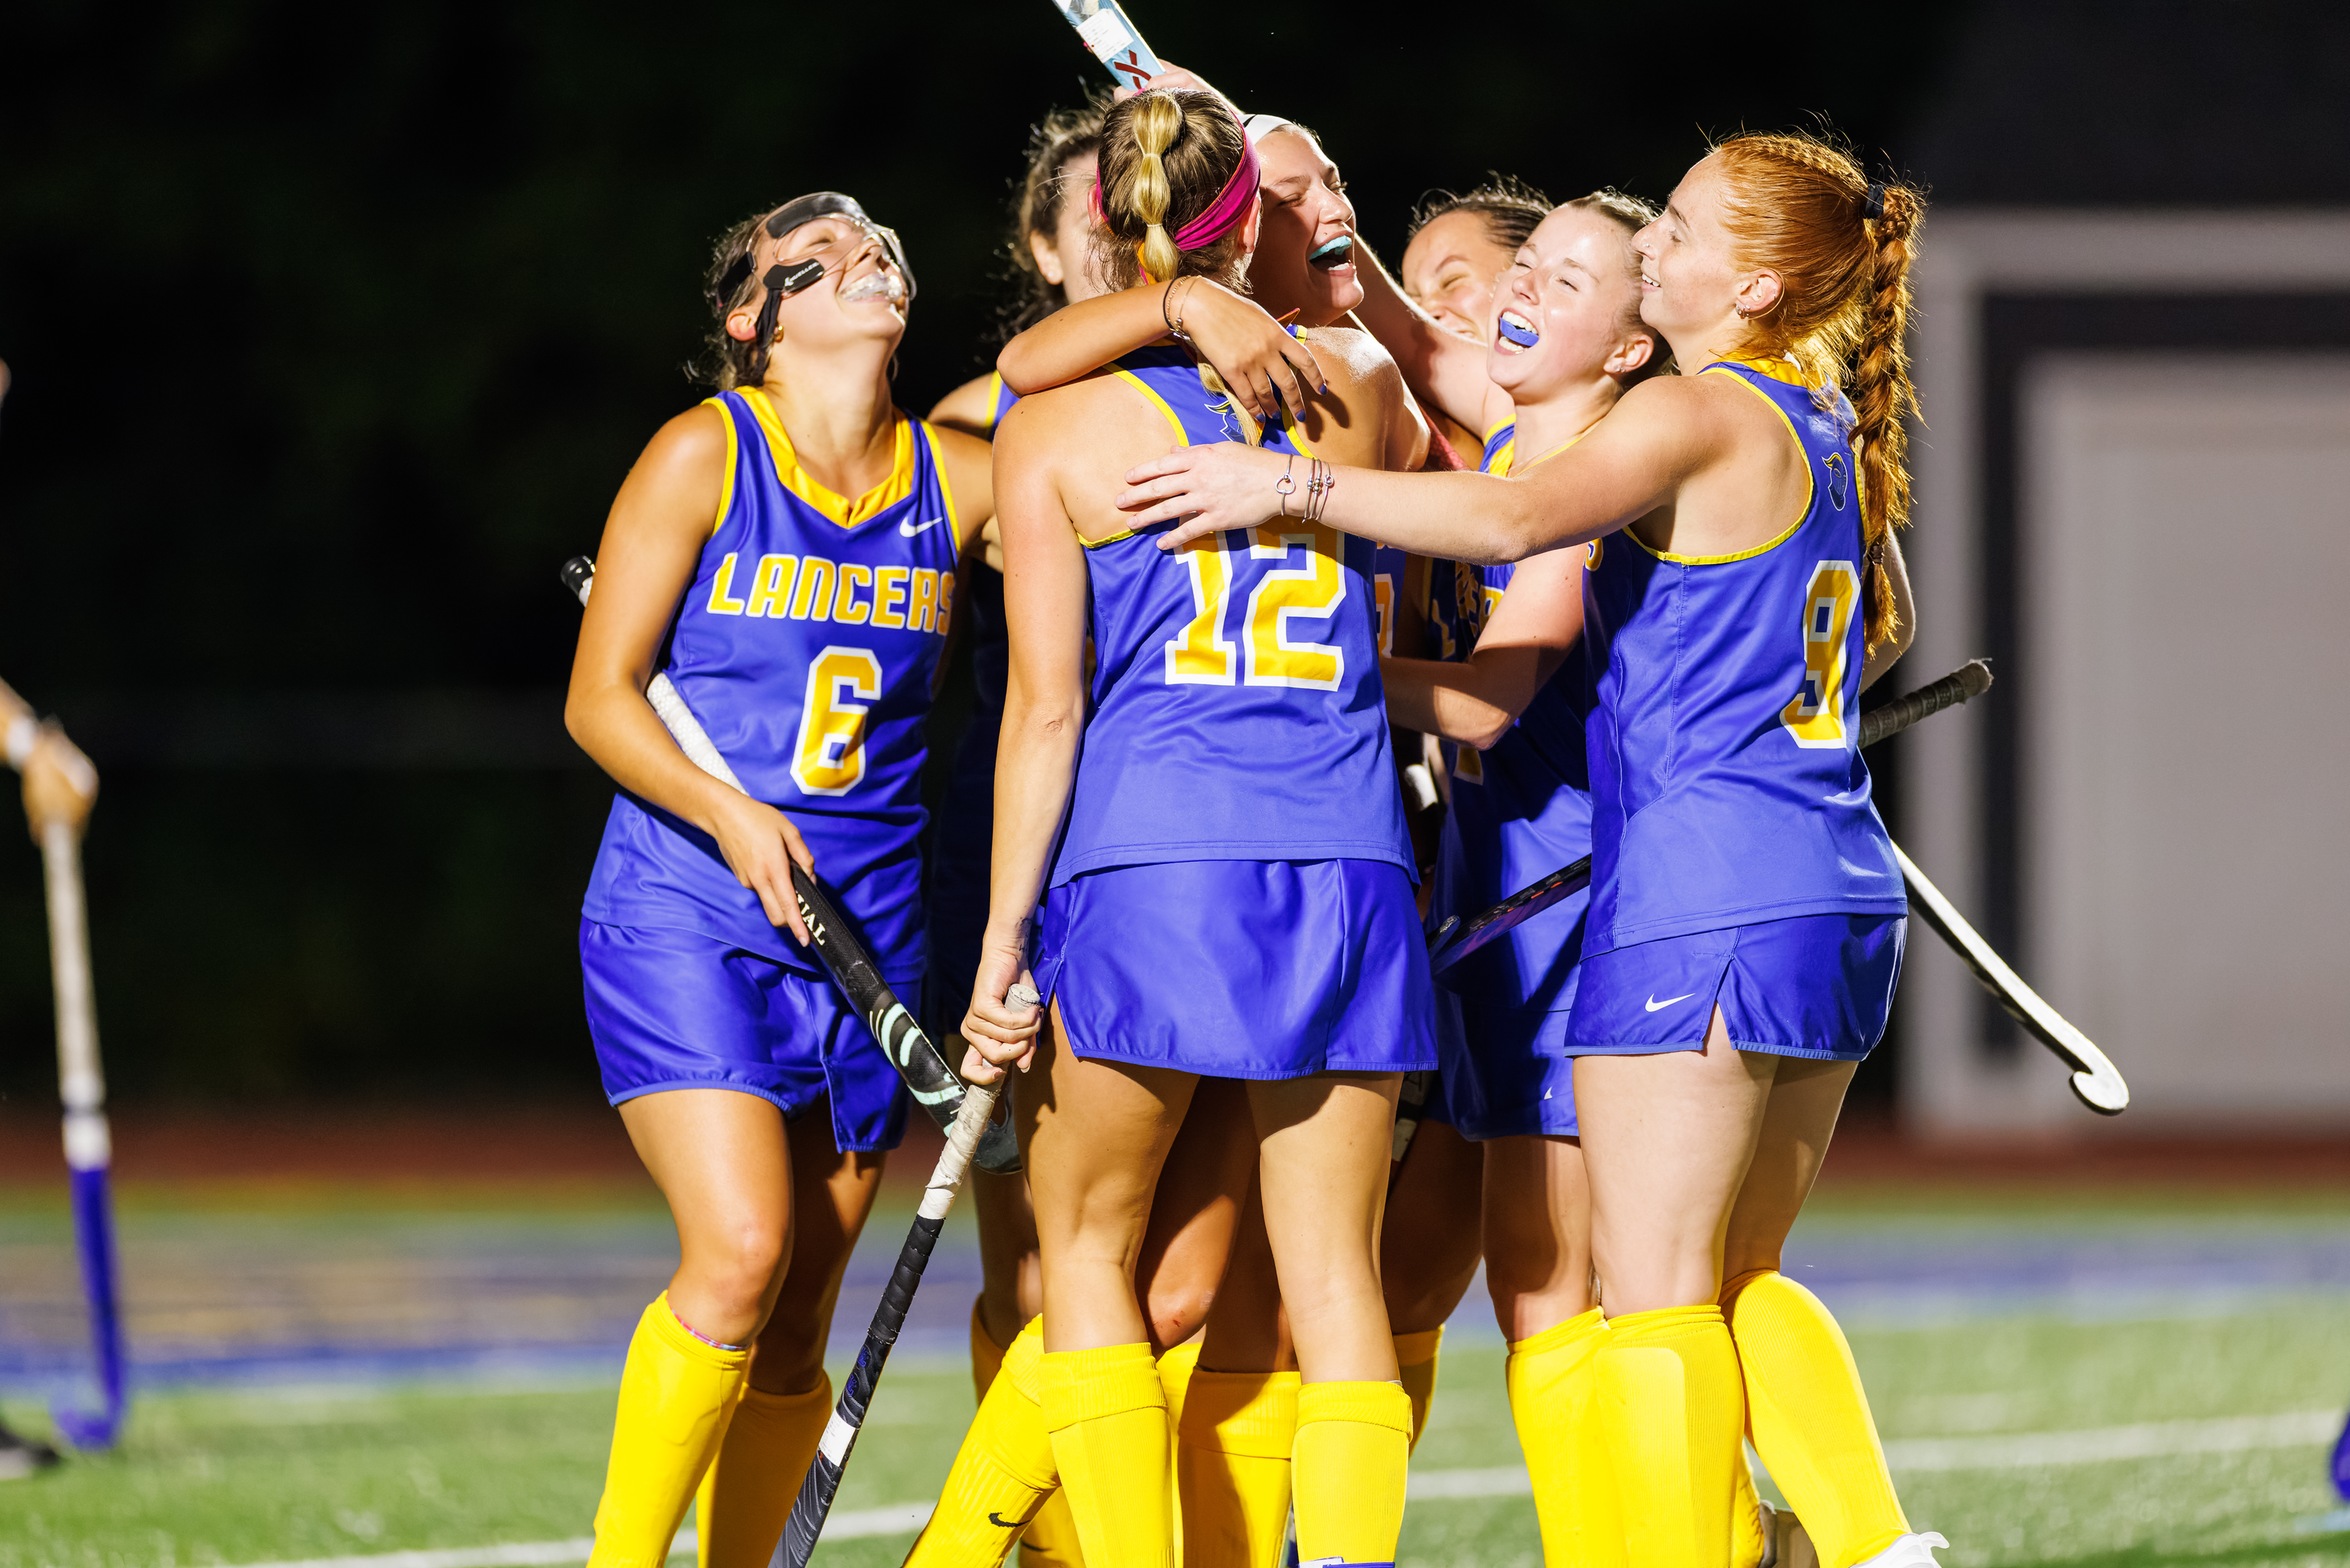 Adams Hat Trick Leads Lancers to Victory over Rams